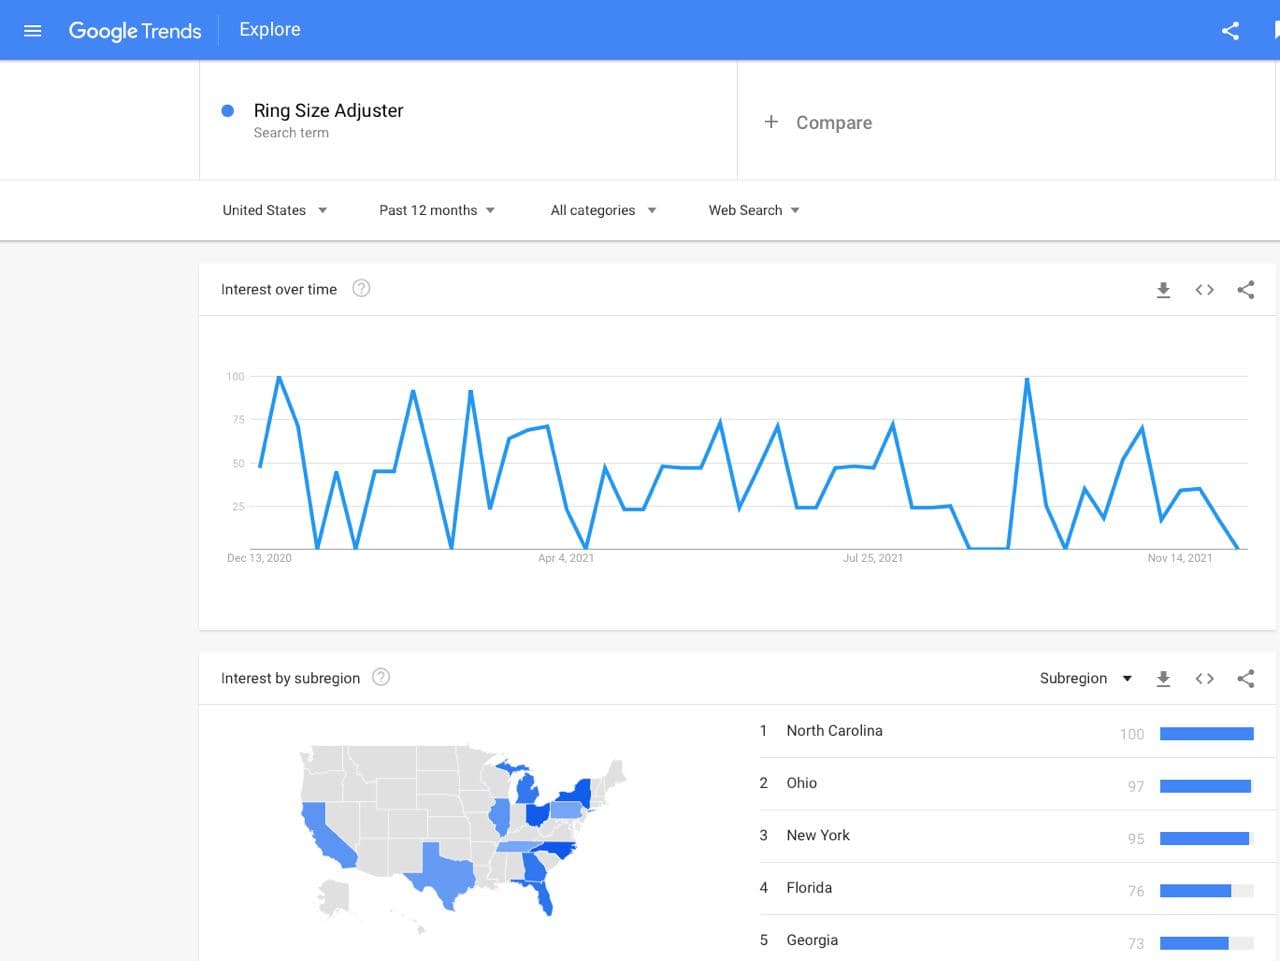 Google trends is a tool that allows to determine the popularity of a search term